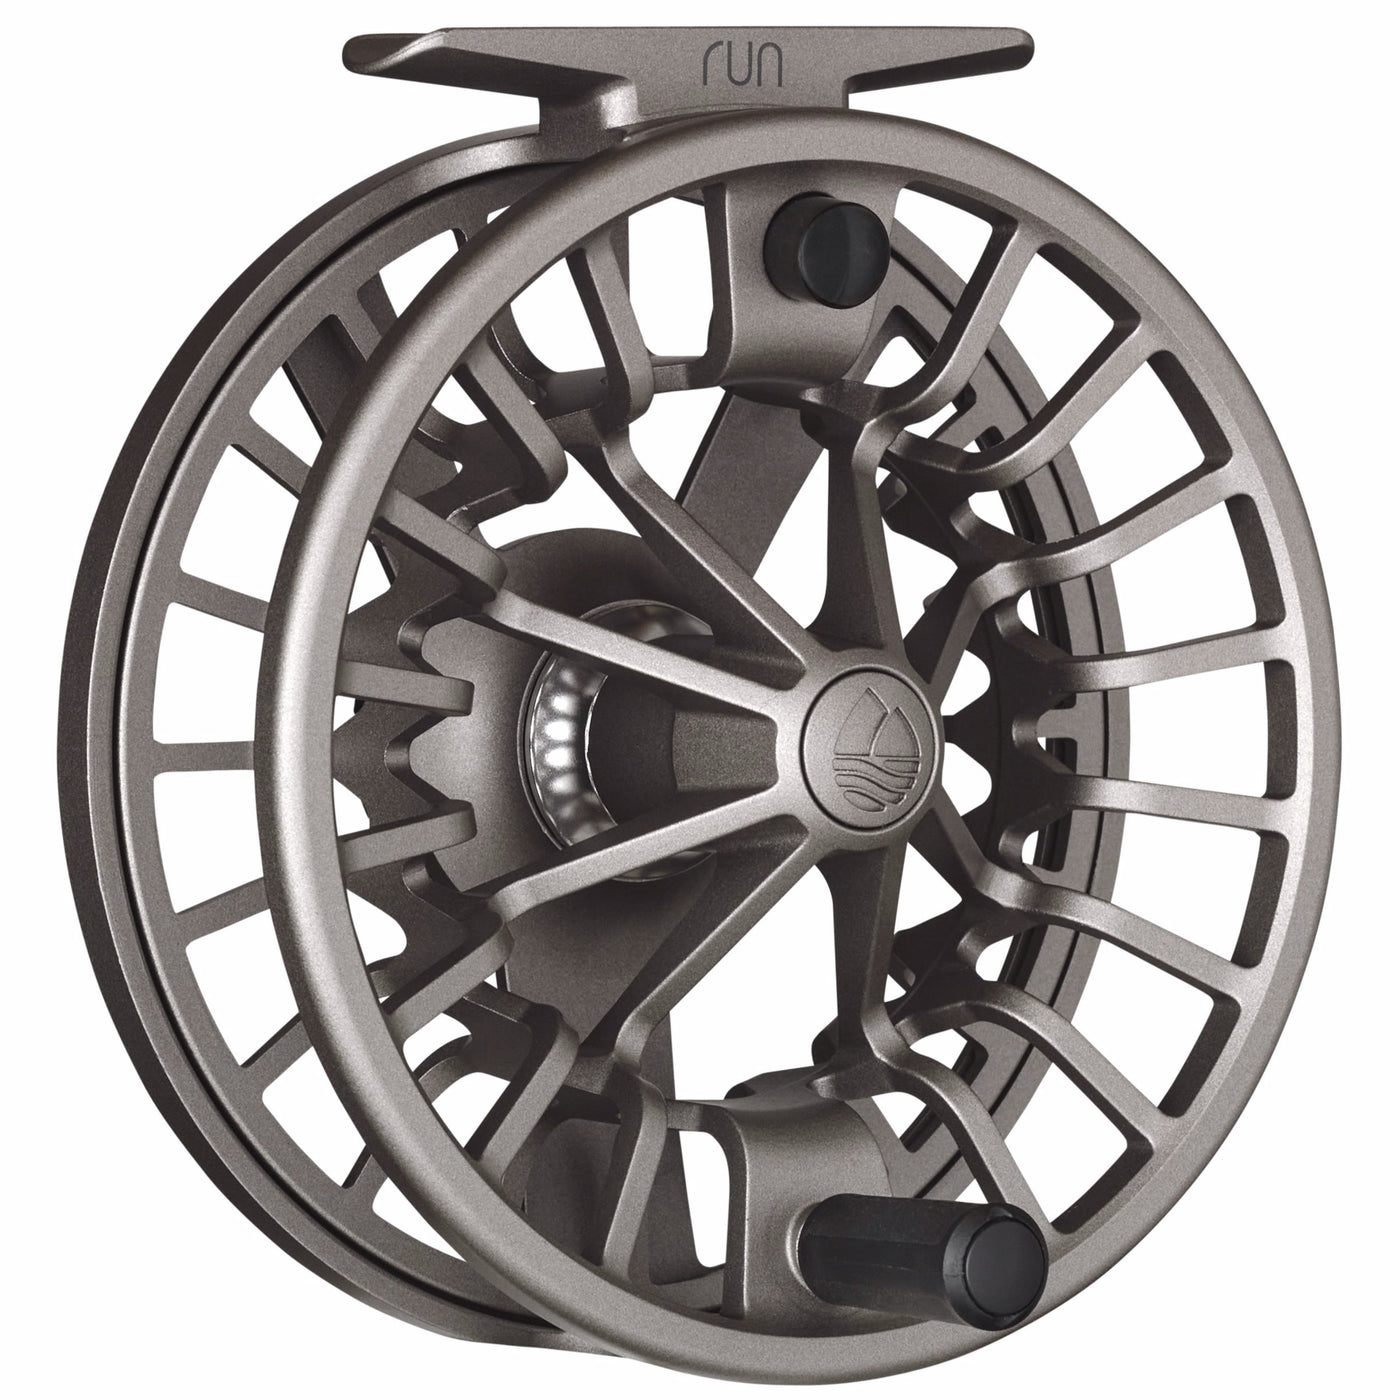 Redington Run Fly Reels - Size 5/6 - Color Coyote - New